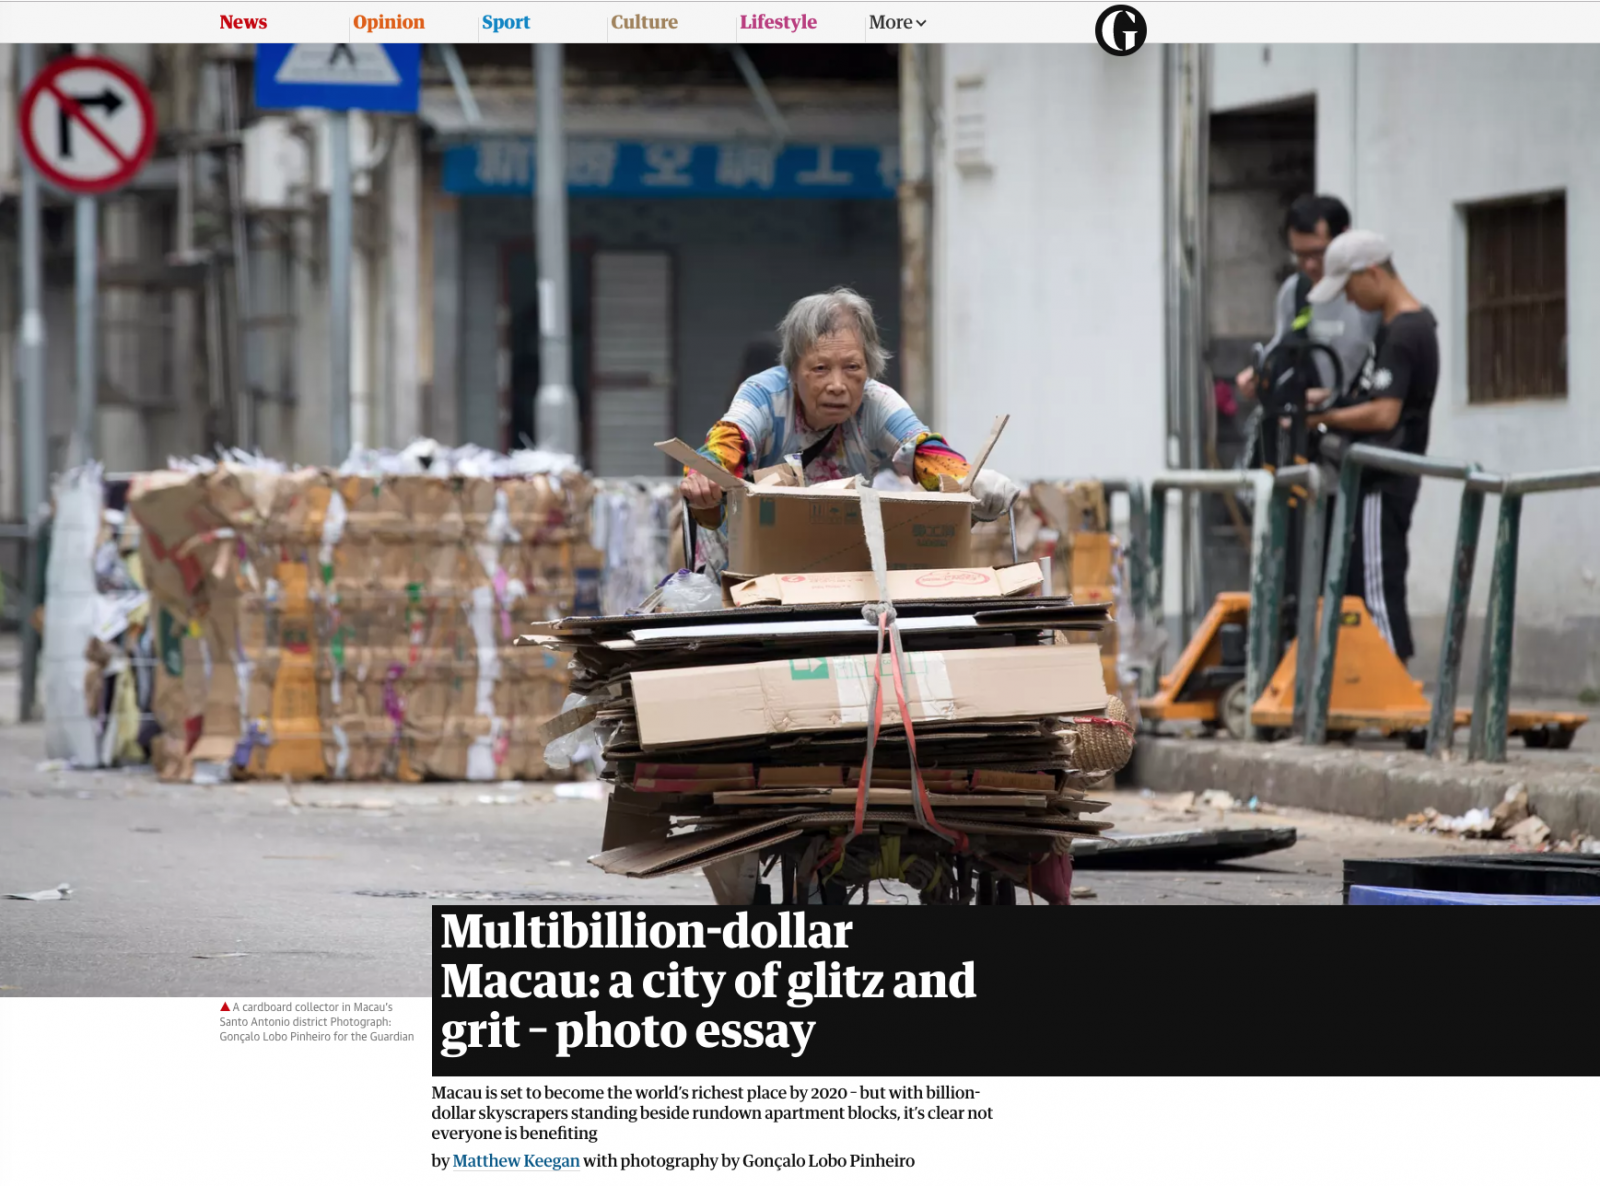 Multibillion-dollar Macau: a city of glitz and grit "“ photo essay - This is my first assignment for The Guardian.